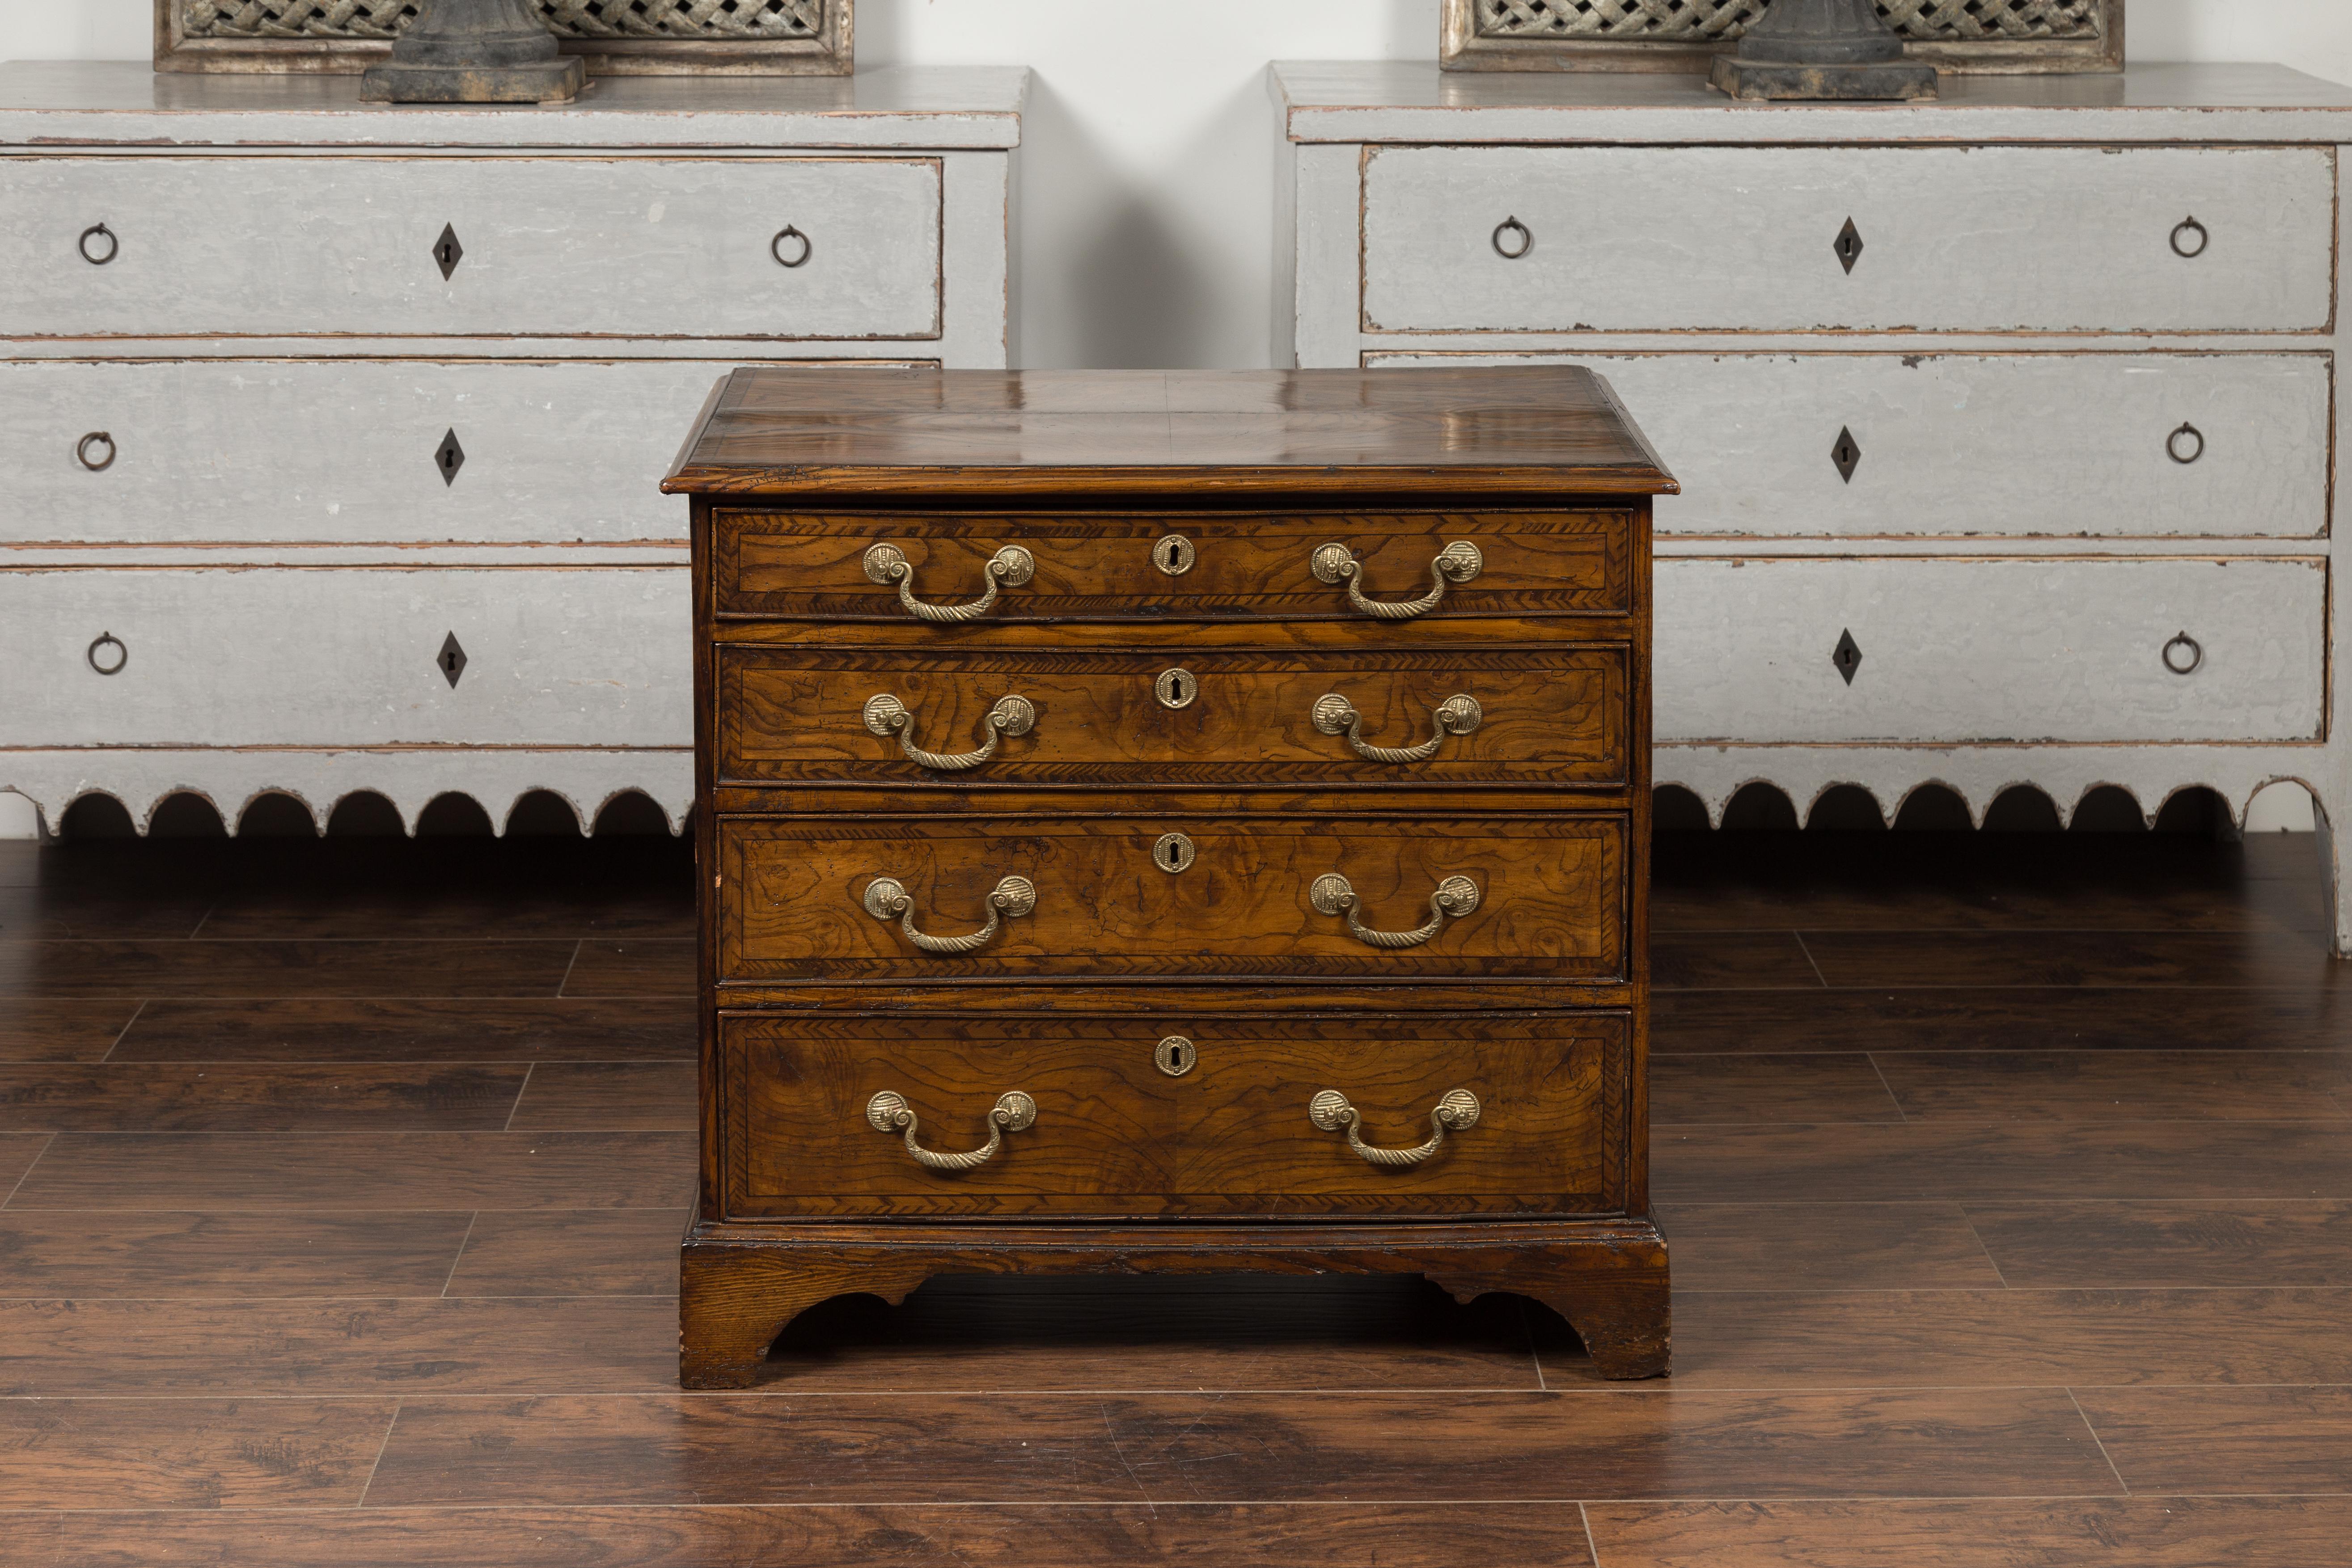 An English George III period burl wood chest-of-drawers from the early 19th century, with feather banding inlay and bronze inlay. Crafted in England during the reign of King George III, this burl wood chest features a rectangular top, sitting above